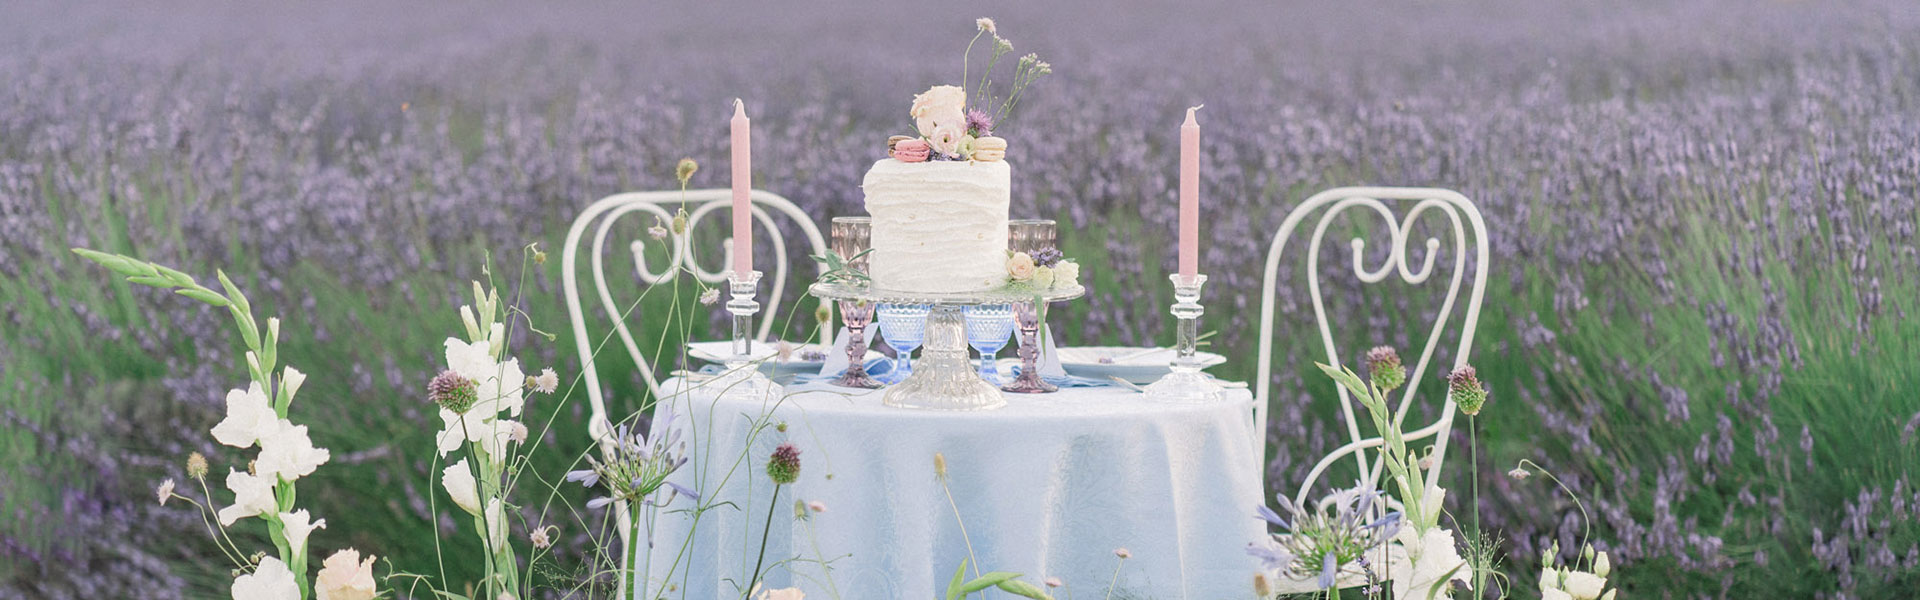 Wedding planning in Provence